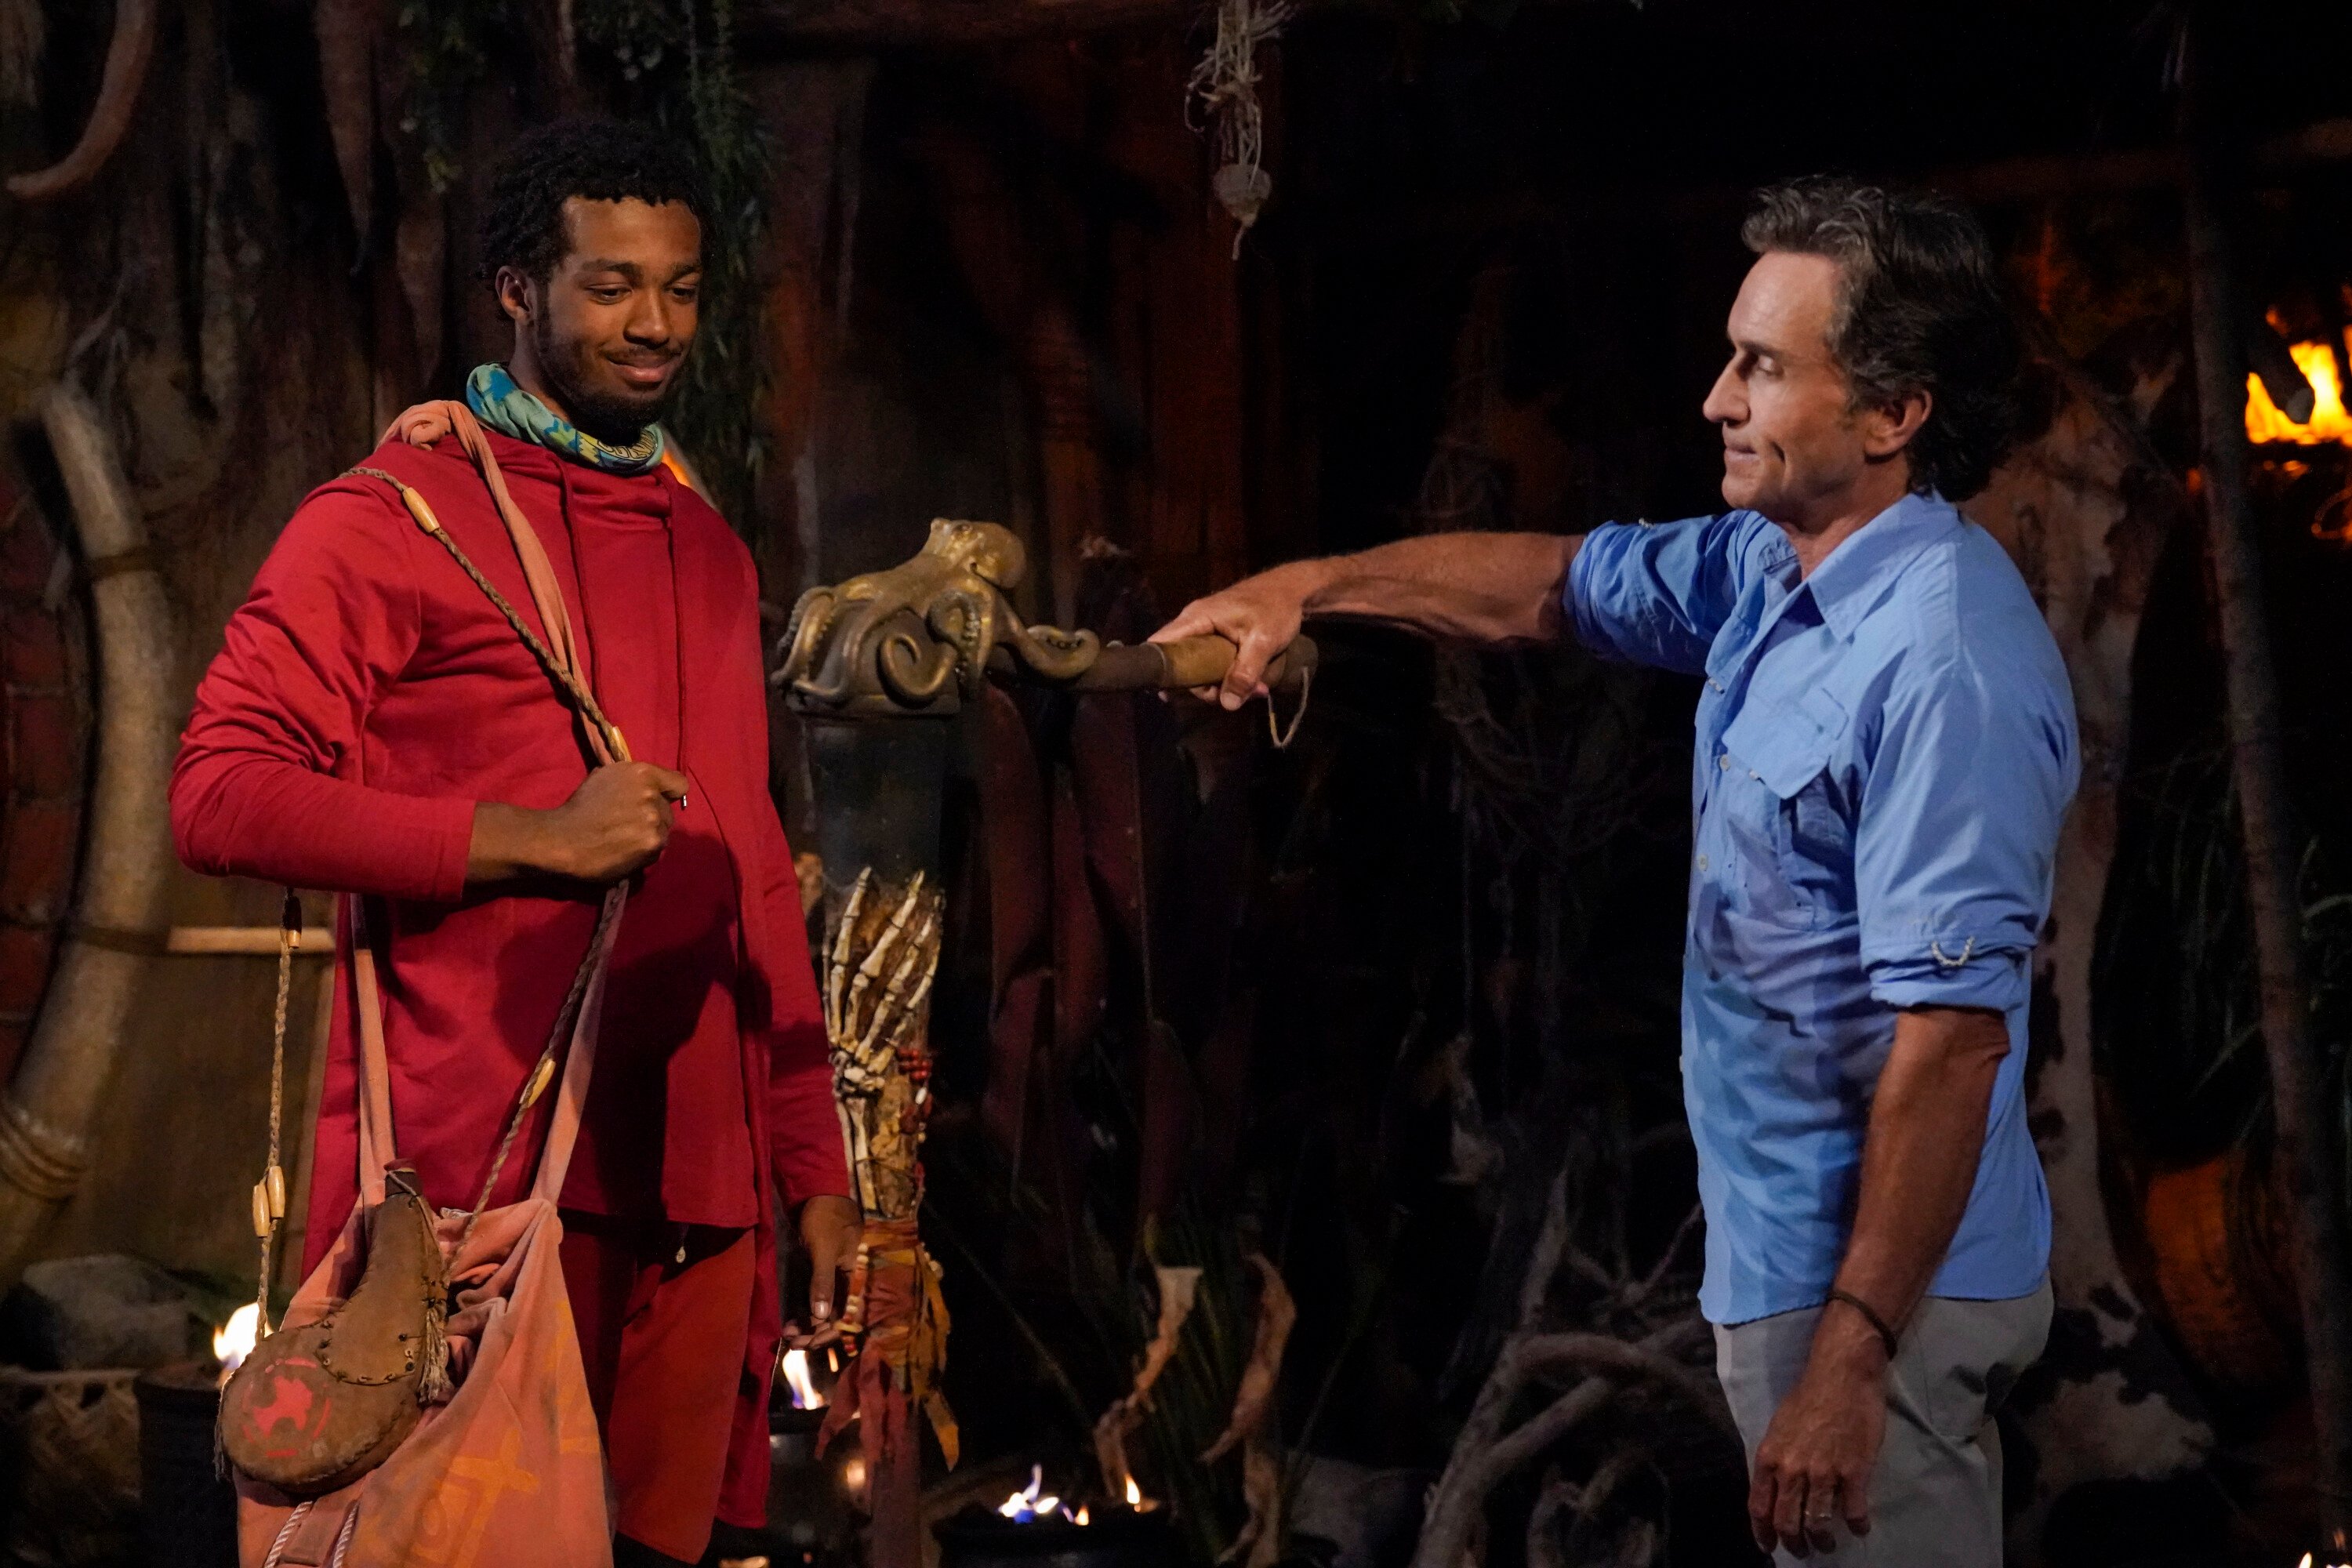 Jeff Probst snuffs Dwight Moore's torch, who had one of the immunity idols in his pocket, in 'Survivor' Season 43 Episode 7. Dwight wears a red hoodie and red shorts. Jeff wears a blue button-up shirt and gray pants.